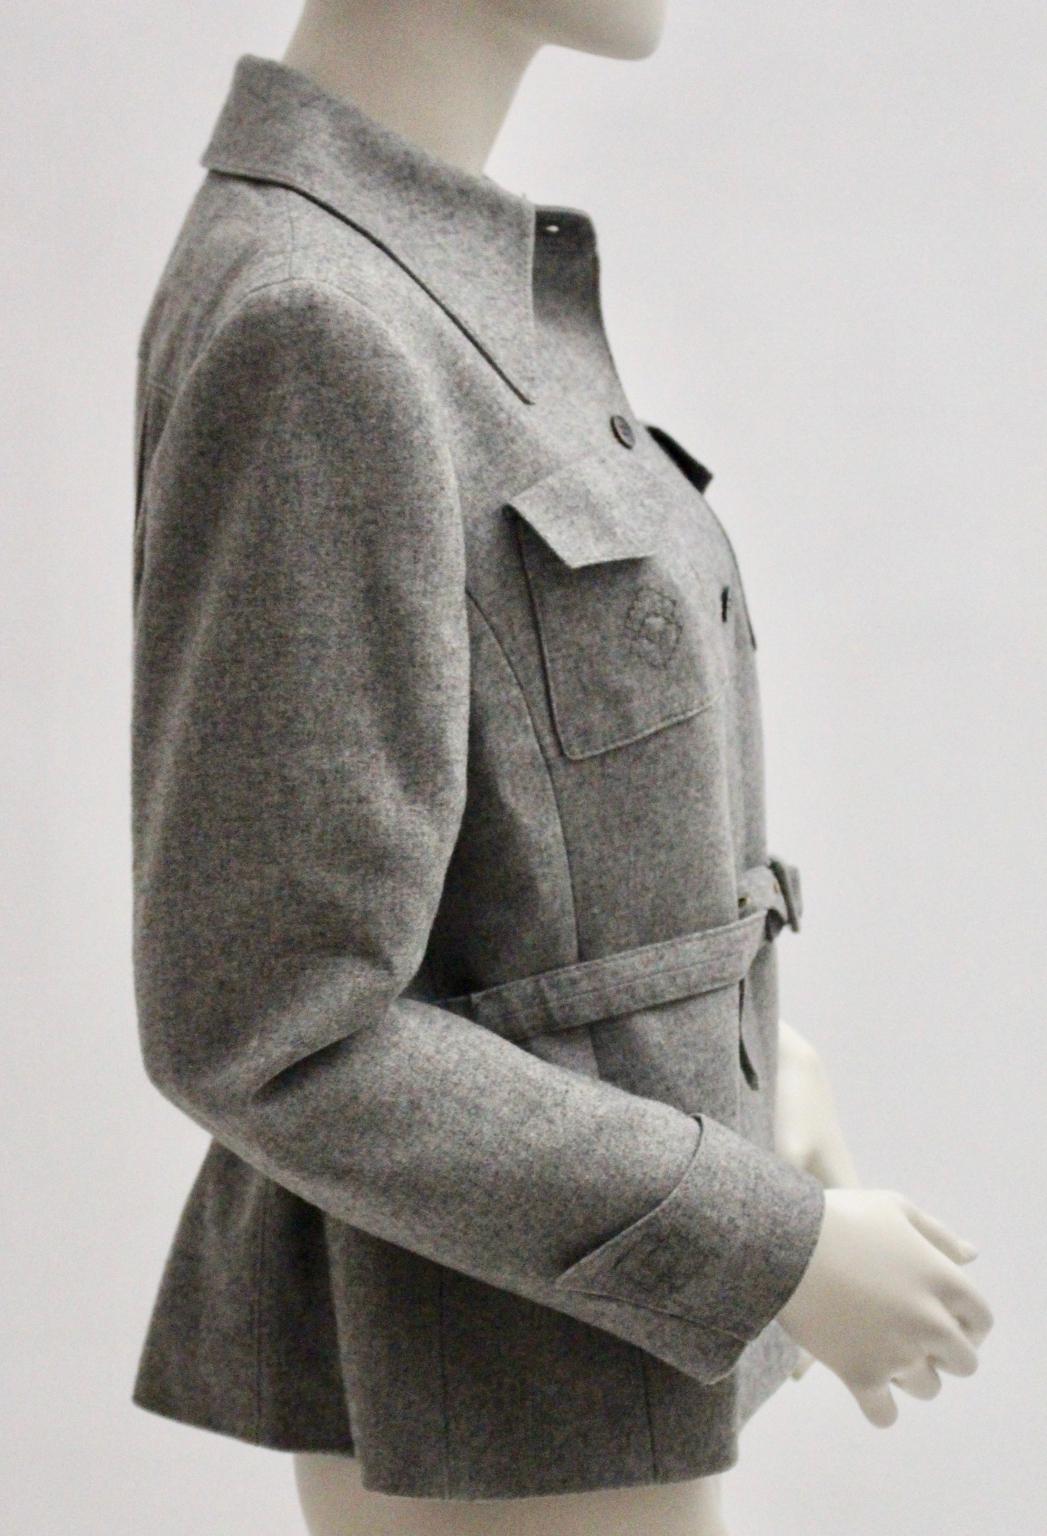 This grey woolen safari-style jacket was designed and made by Herbert Schill, Vienna 1960s.
Herbert Schill was the assistant of the very popular designer Fred Adlmüller in Vienna.
His atelier was located in the 1st district of Vienna,